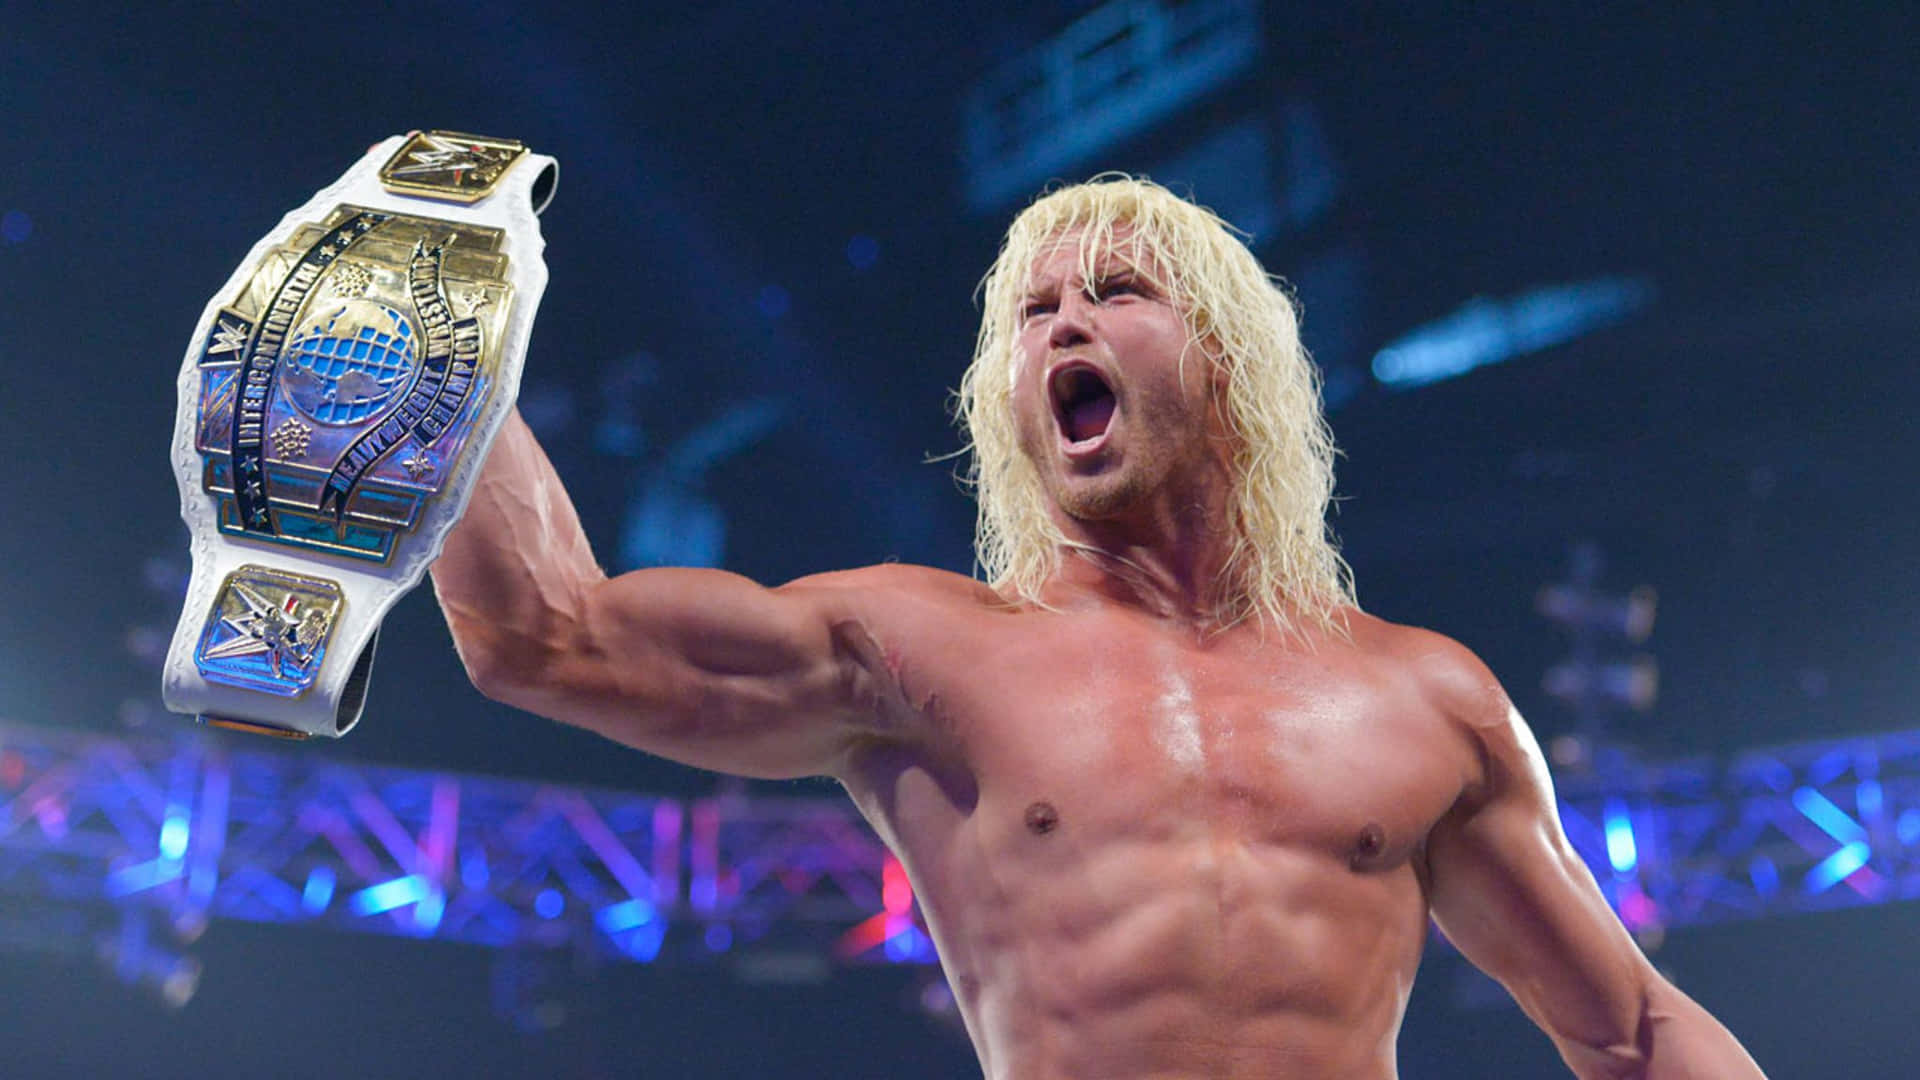 Dolph Ziggler - The Show-off With Money In The Bank Briefcase